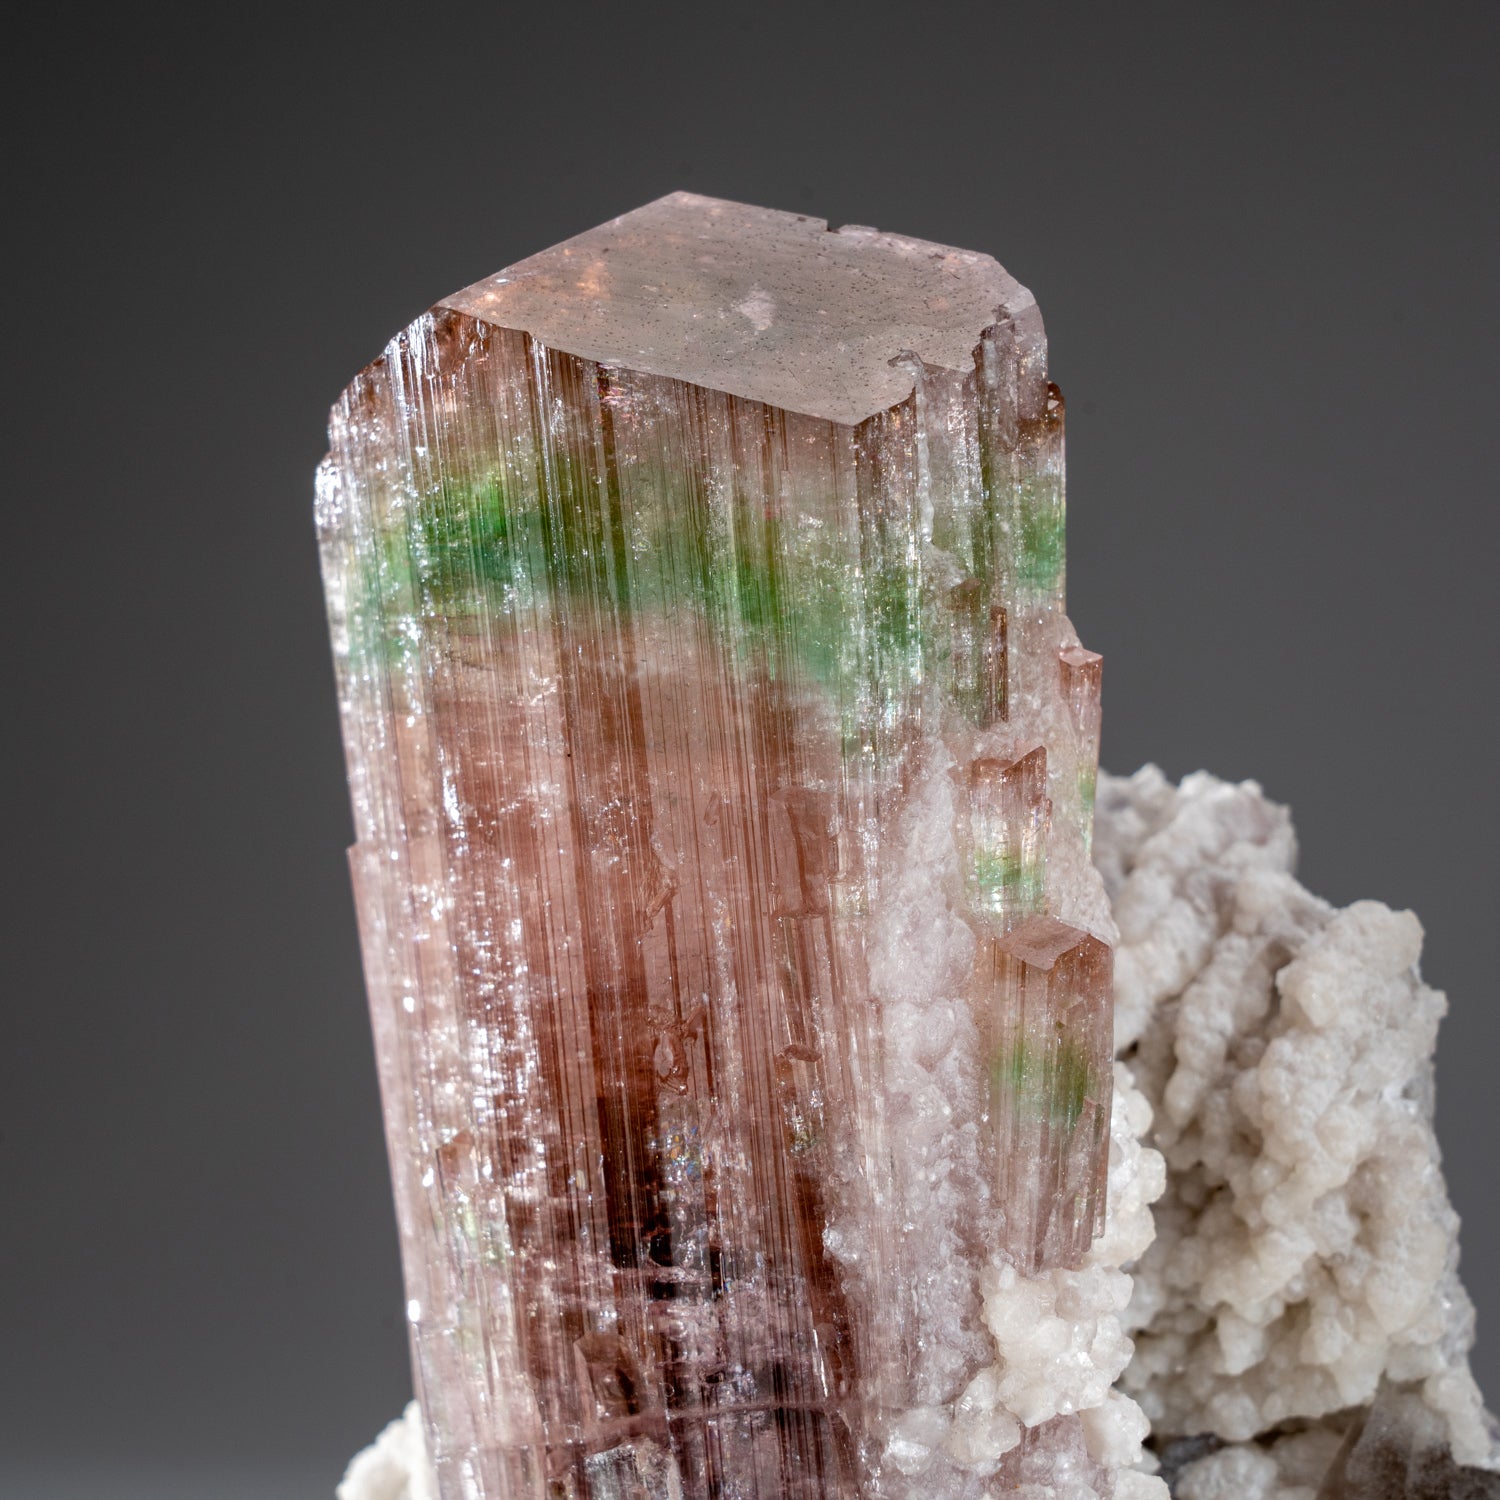 Waterlemon Tourmaline with Smoky Quartz and Albite from Nuristan Province, Afghanistan